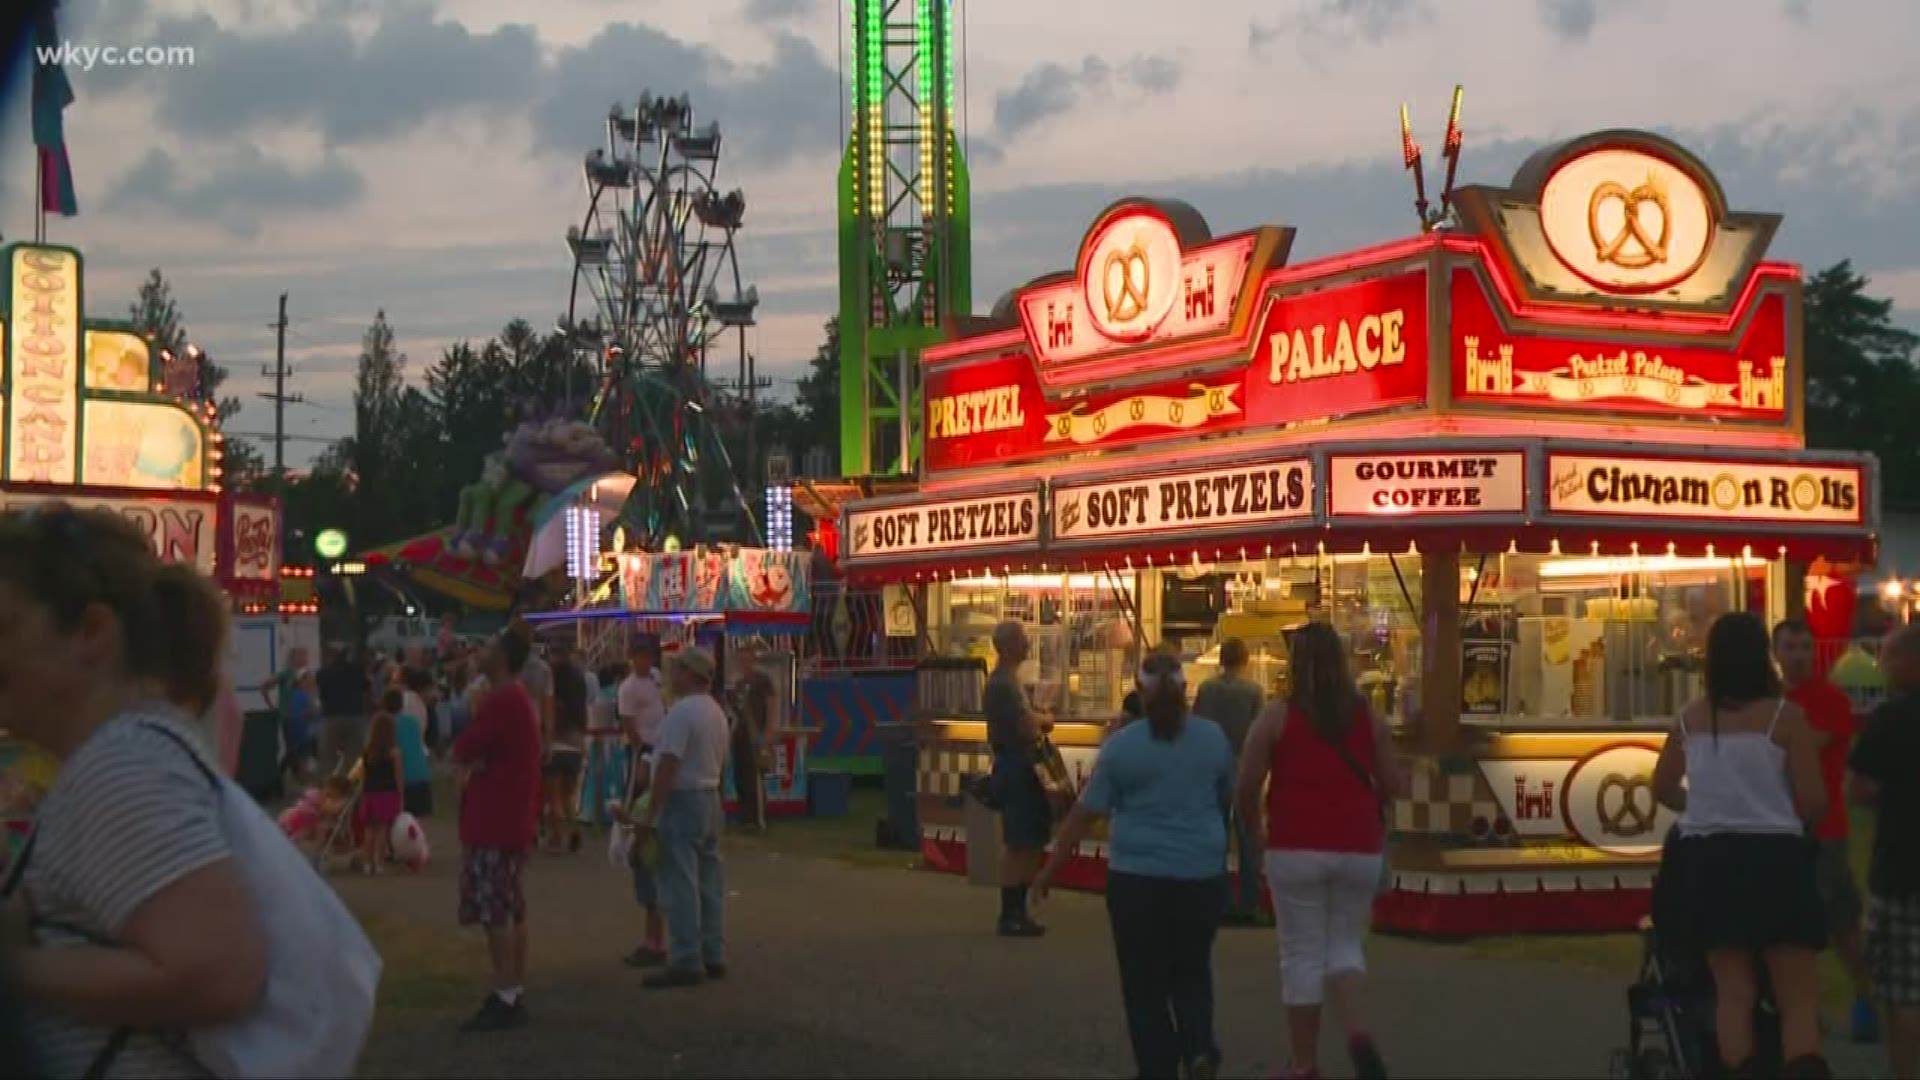 Stark County Fair: What to expect in 2019 | wkyc.com